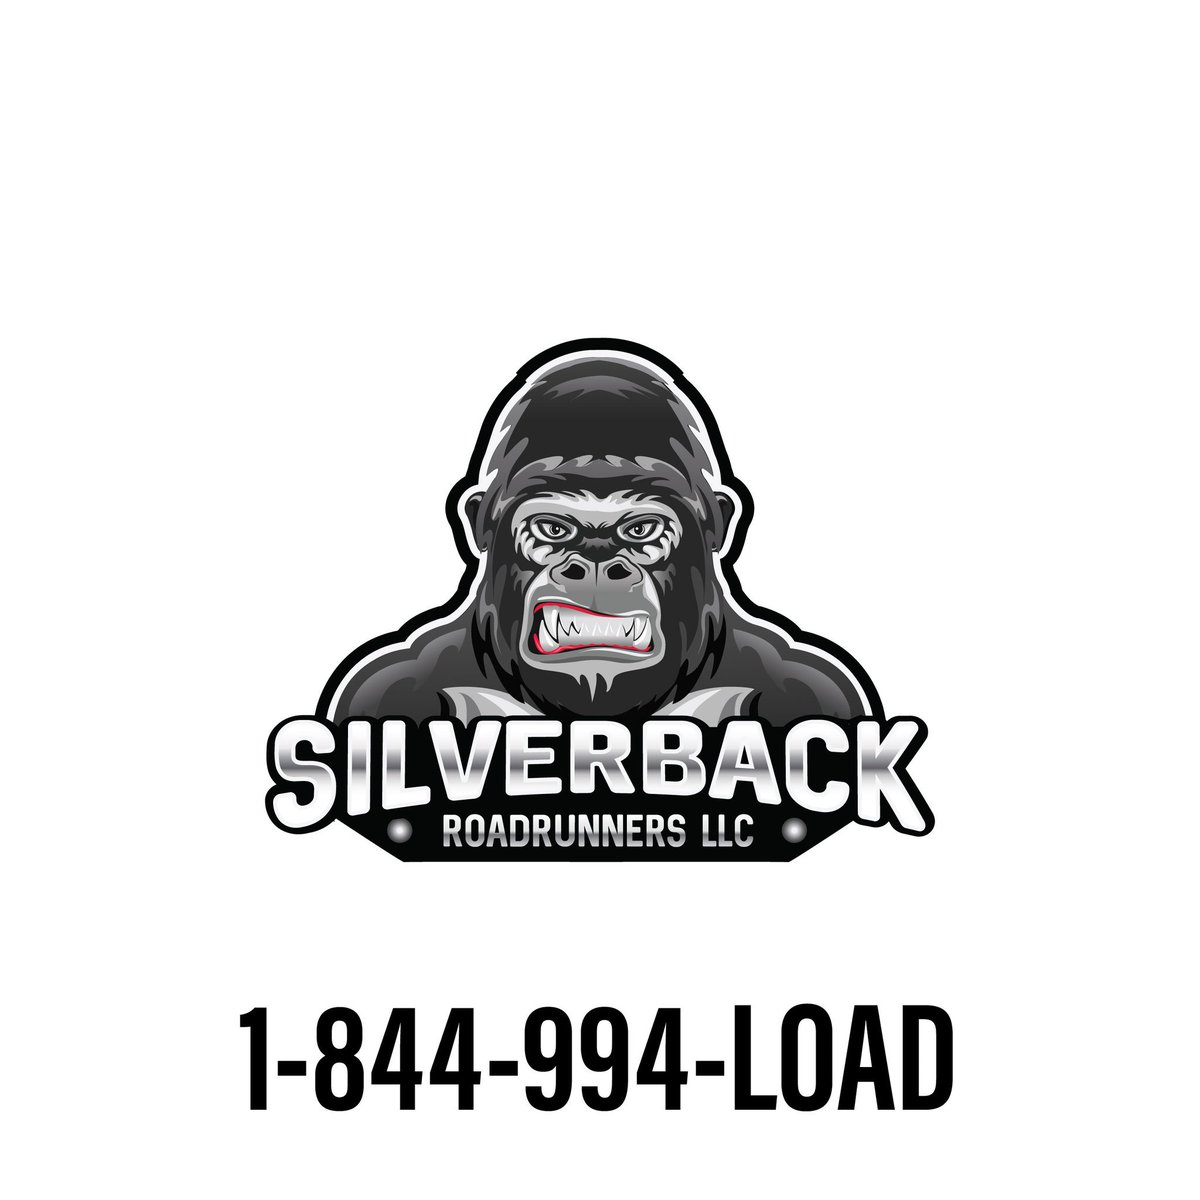 Need a load? We dispatch flatbed, stepdeck, gooseneck (hot shots), dry van, reefer, and RGN. We take care of the paperwork too! #owneroperator  #trucking